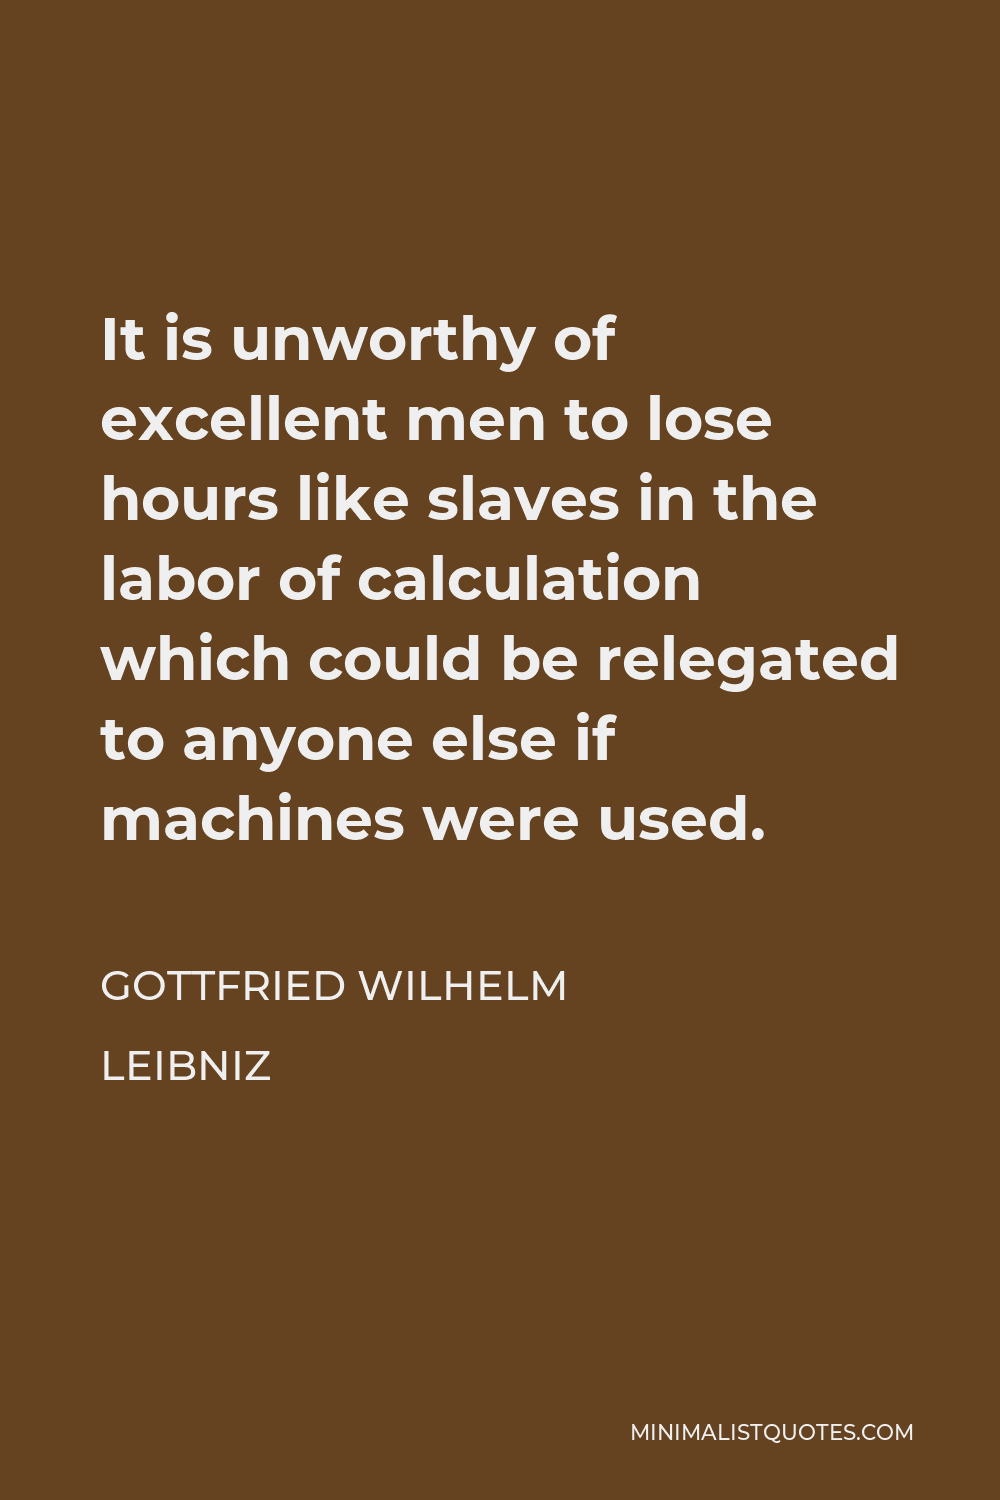 Gottfried Wilhelm Leibniz Quote - It is unworthy of excellent men to lose hours like slaves in the labor of calculation which could be relegated to anyone else if machines were used.